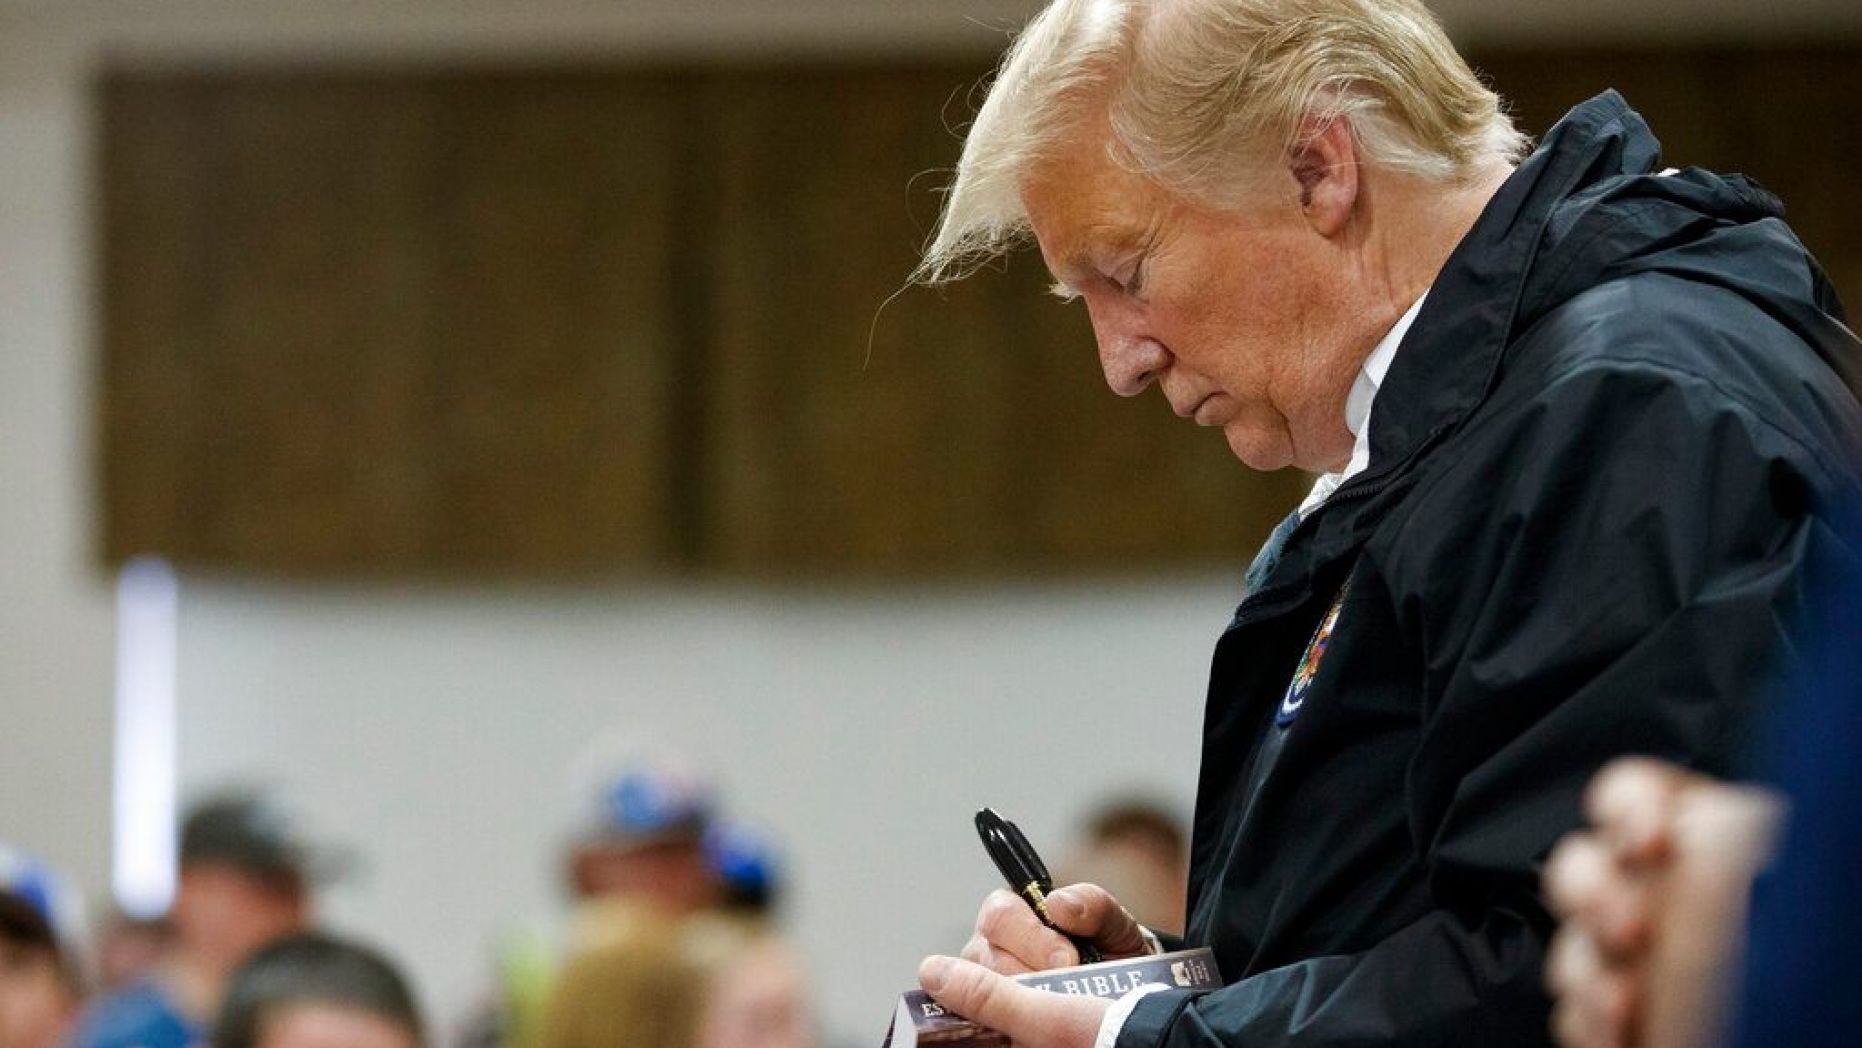 Was It OK for Trump to sign Bibles in Alabama visit? Religious leaders weigh in